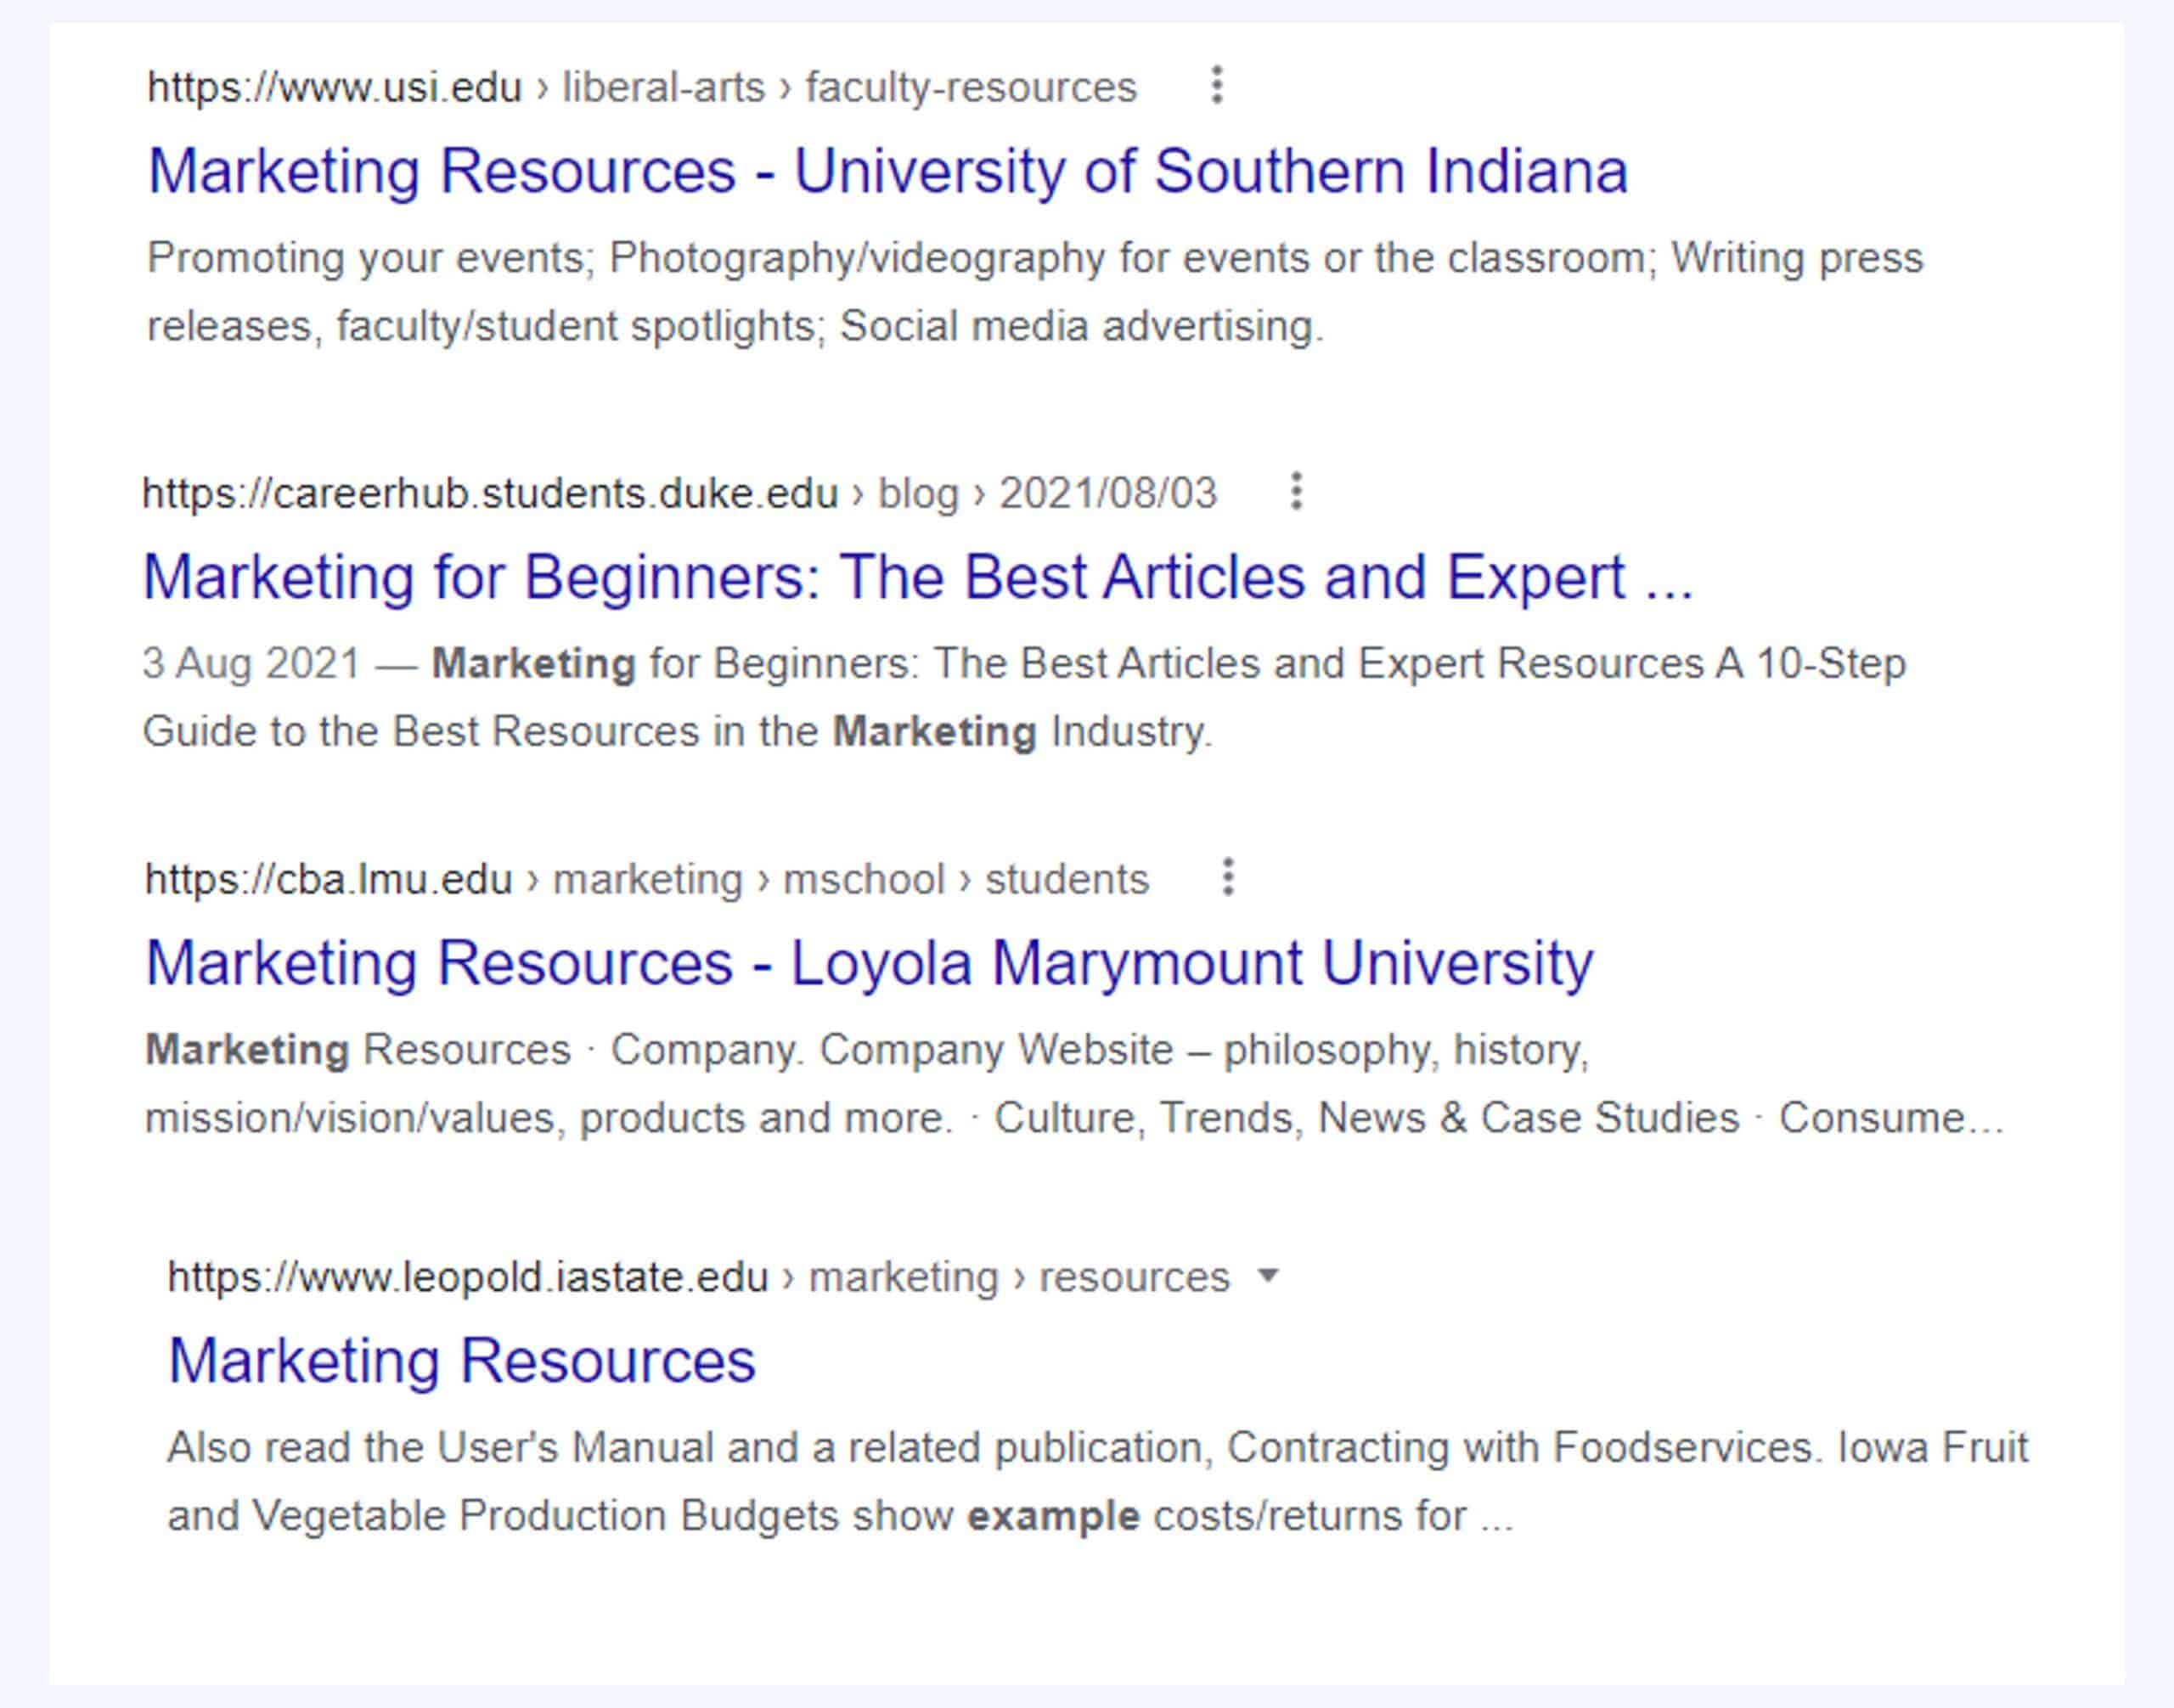 example of resource link building for getting edu backlinks